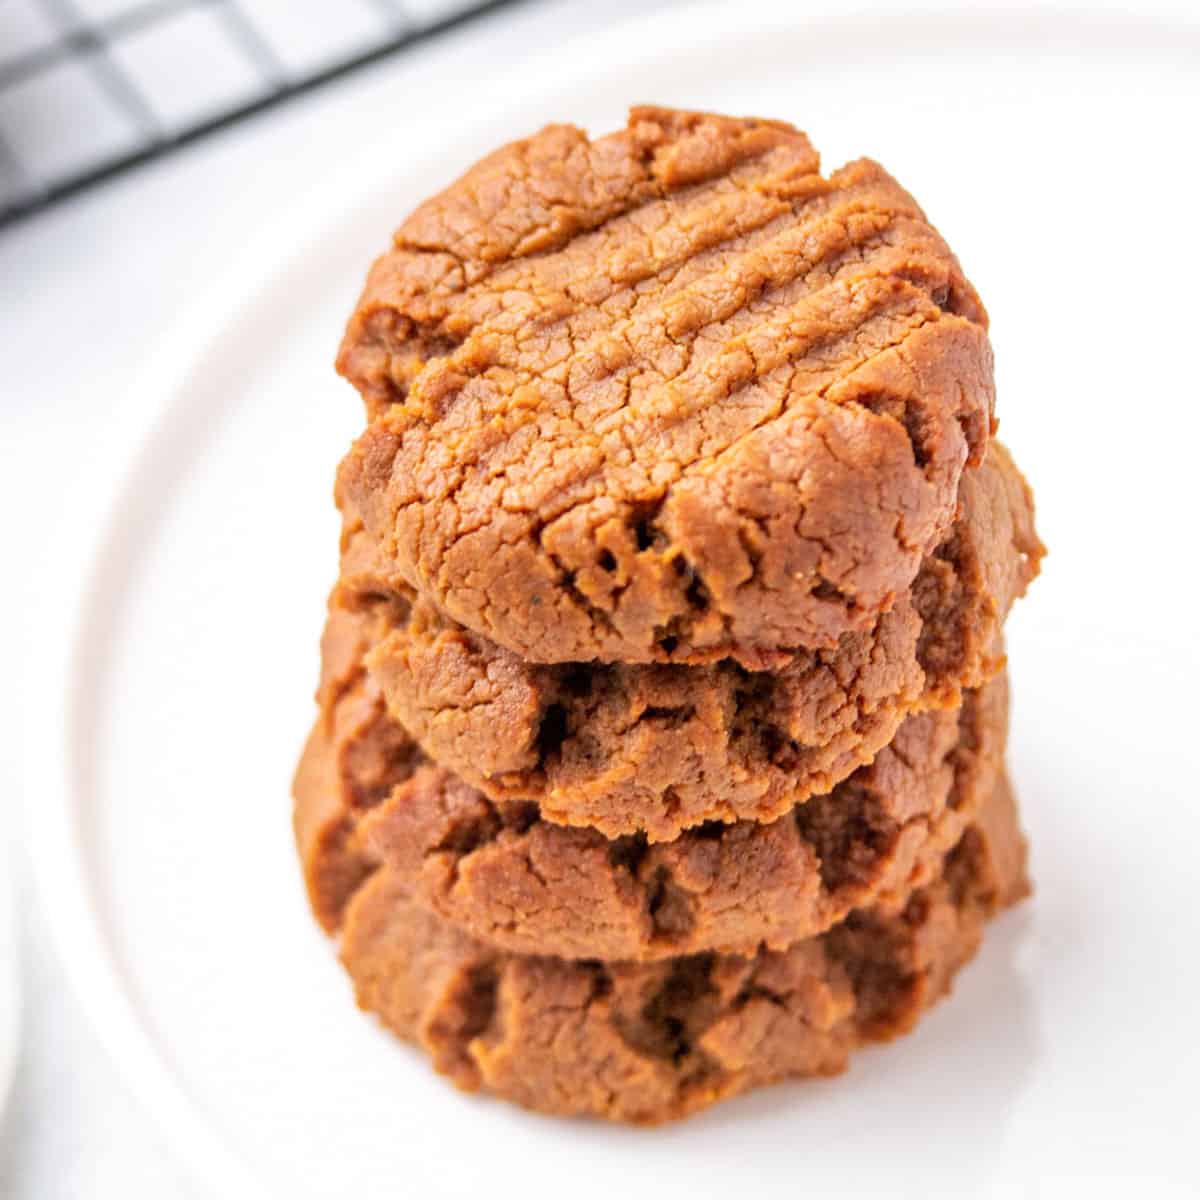 4 peanut butter cookies stacked over each other